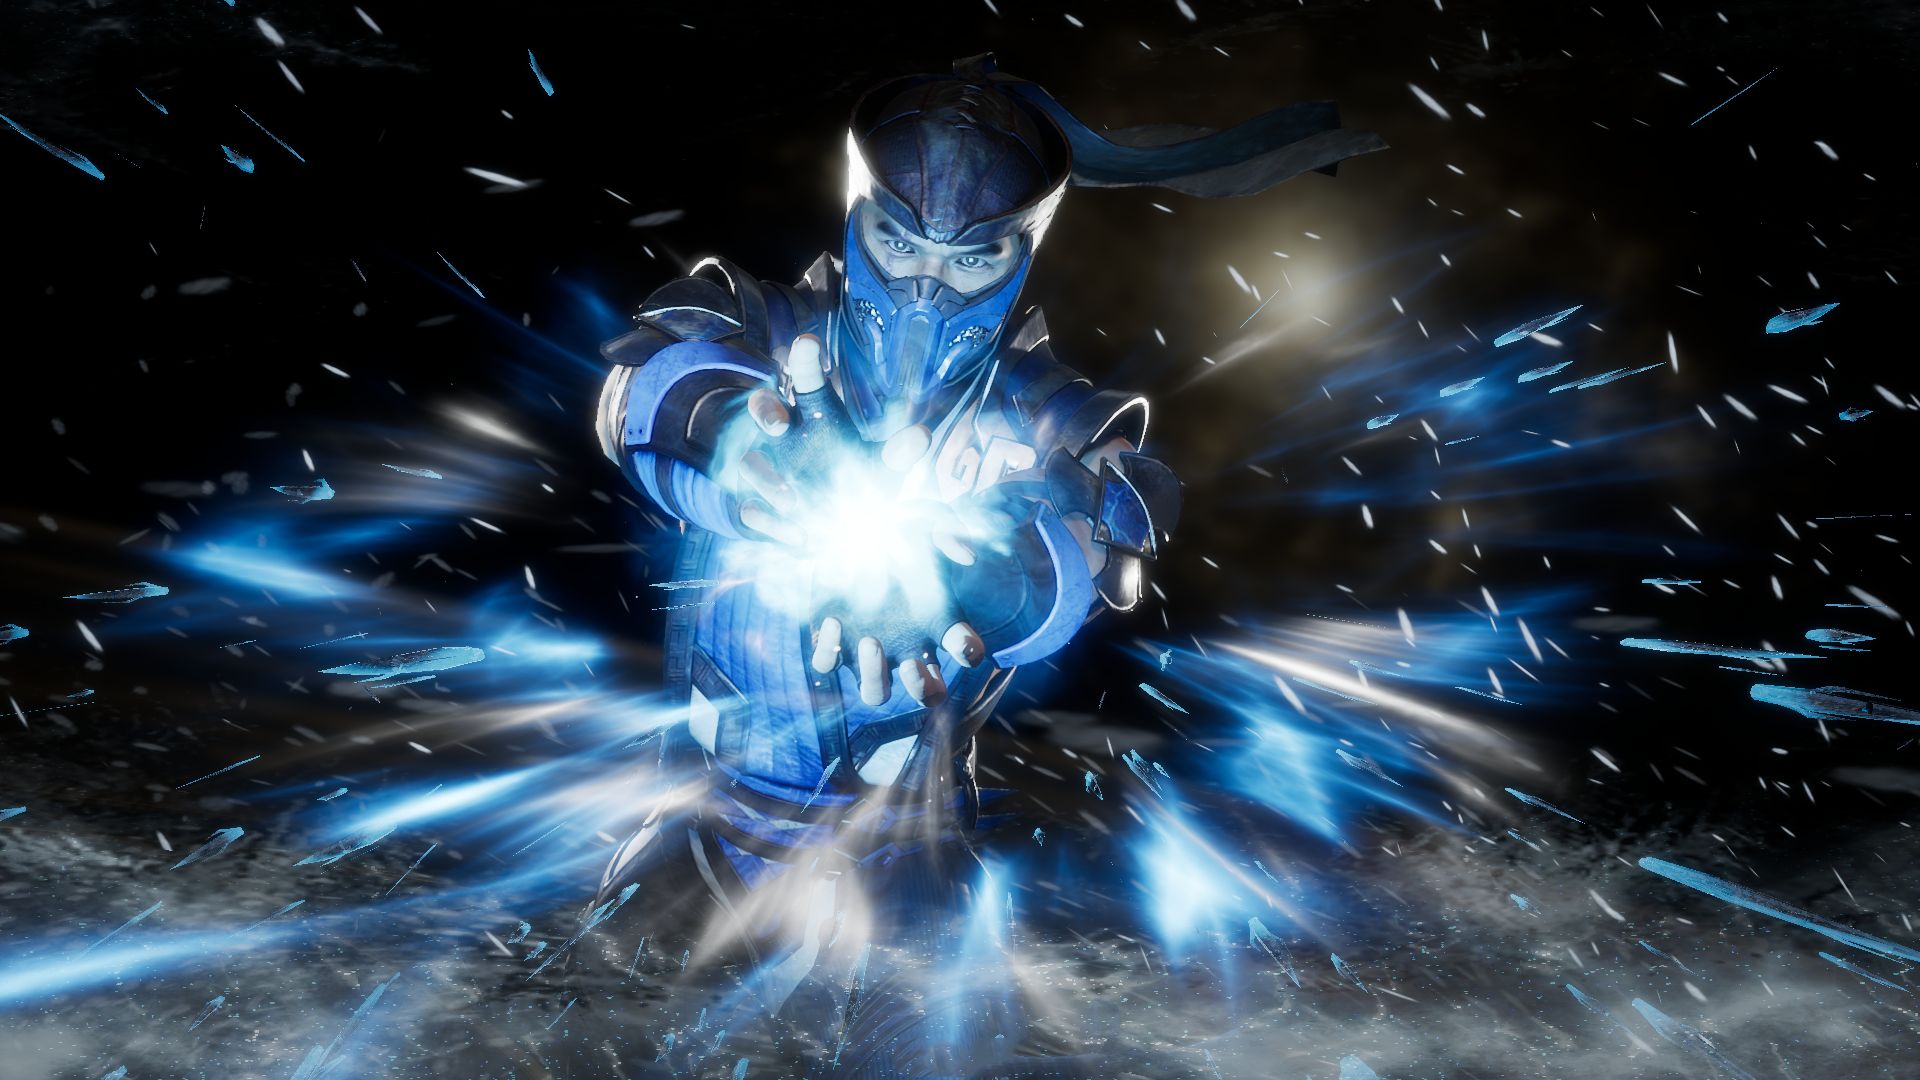 HD wallpaper ice The game Fighter Mortal Kombat SubZero Mortal Kombat  11  Wallpaper Flare